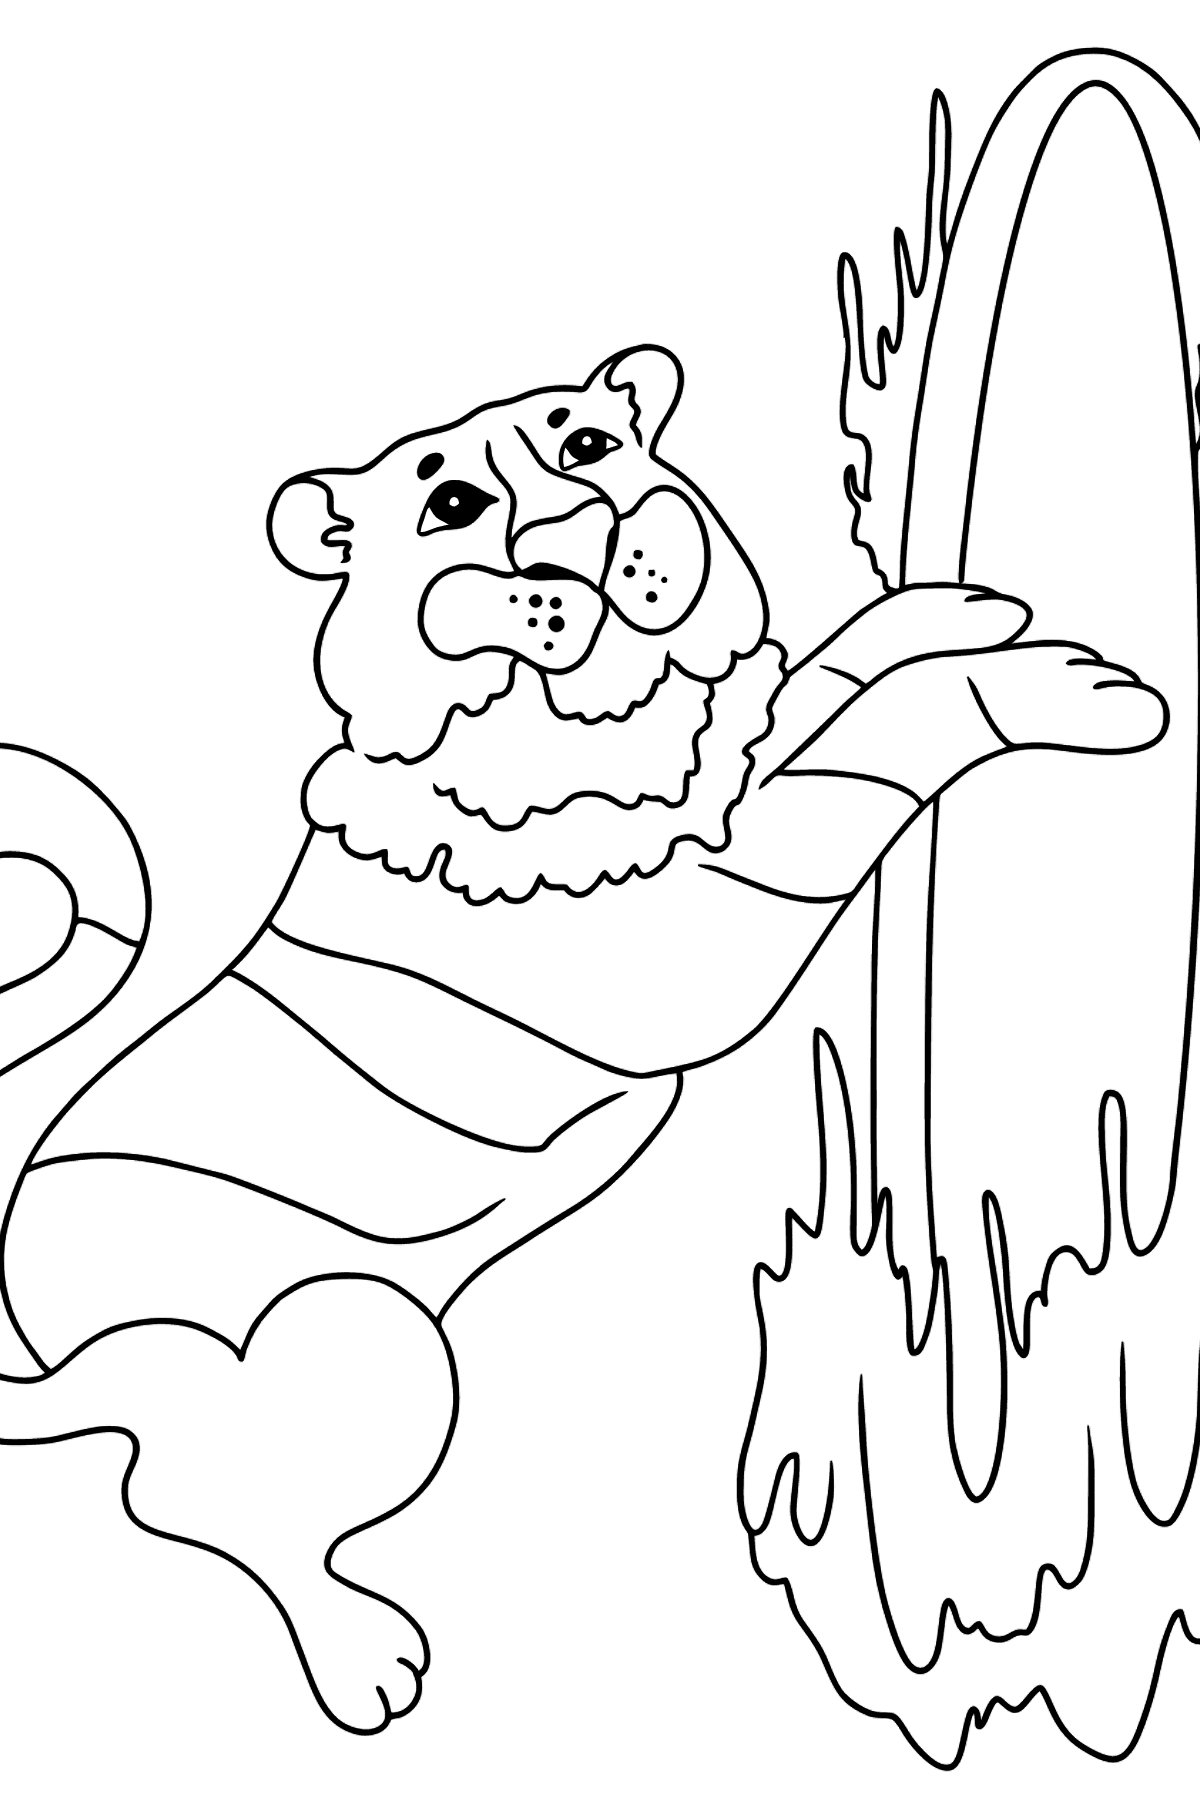 Coloring Page - A Tiger and a Ring of Fire - Coloring Pages for Kids